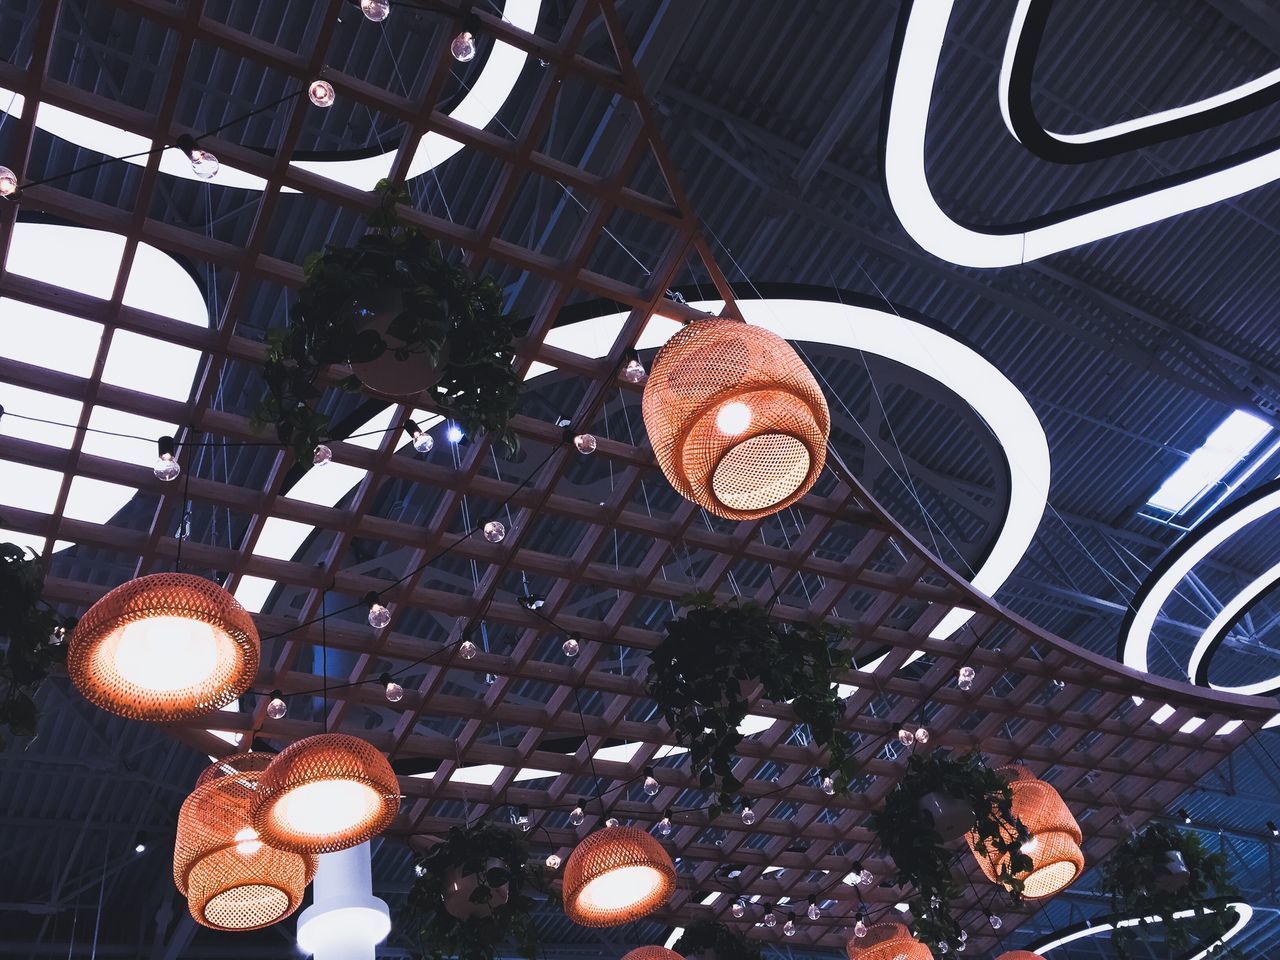 LOW ANGLE VIEW OF PENDANT LIGHTS HANGING ON CEILING